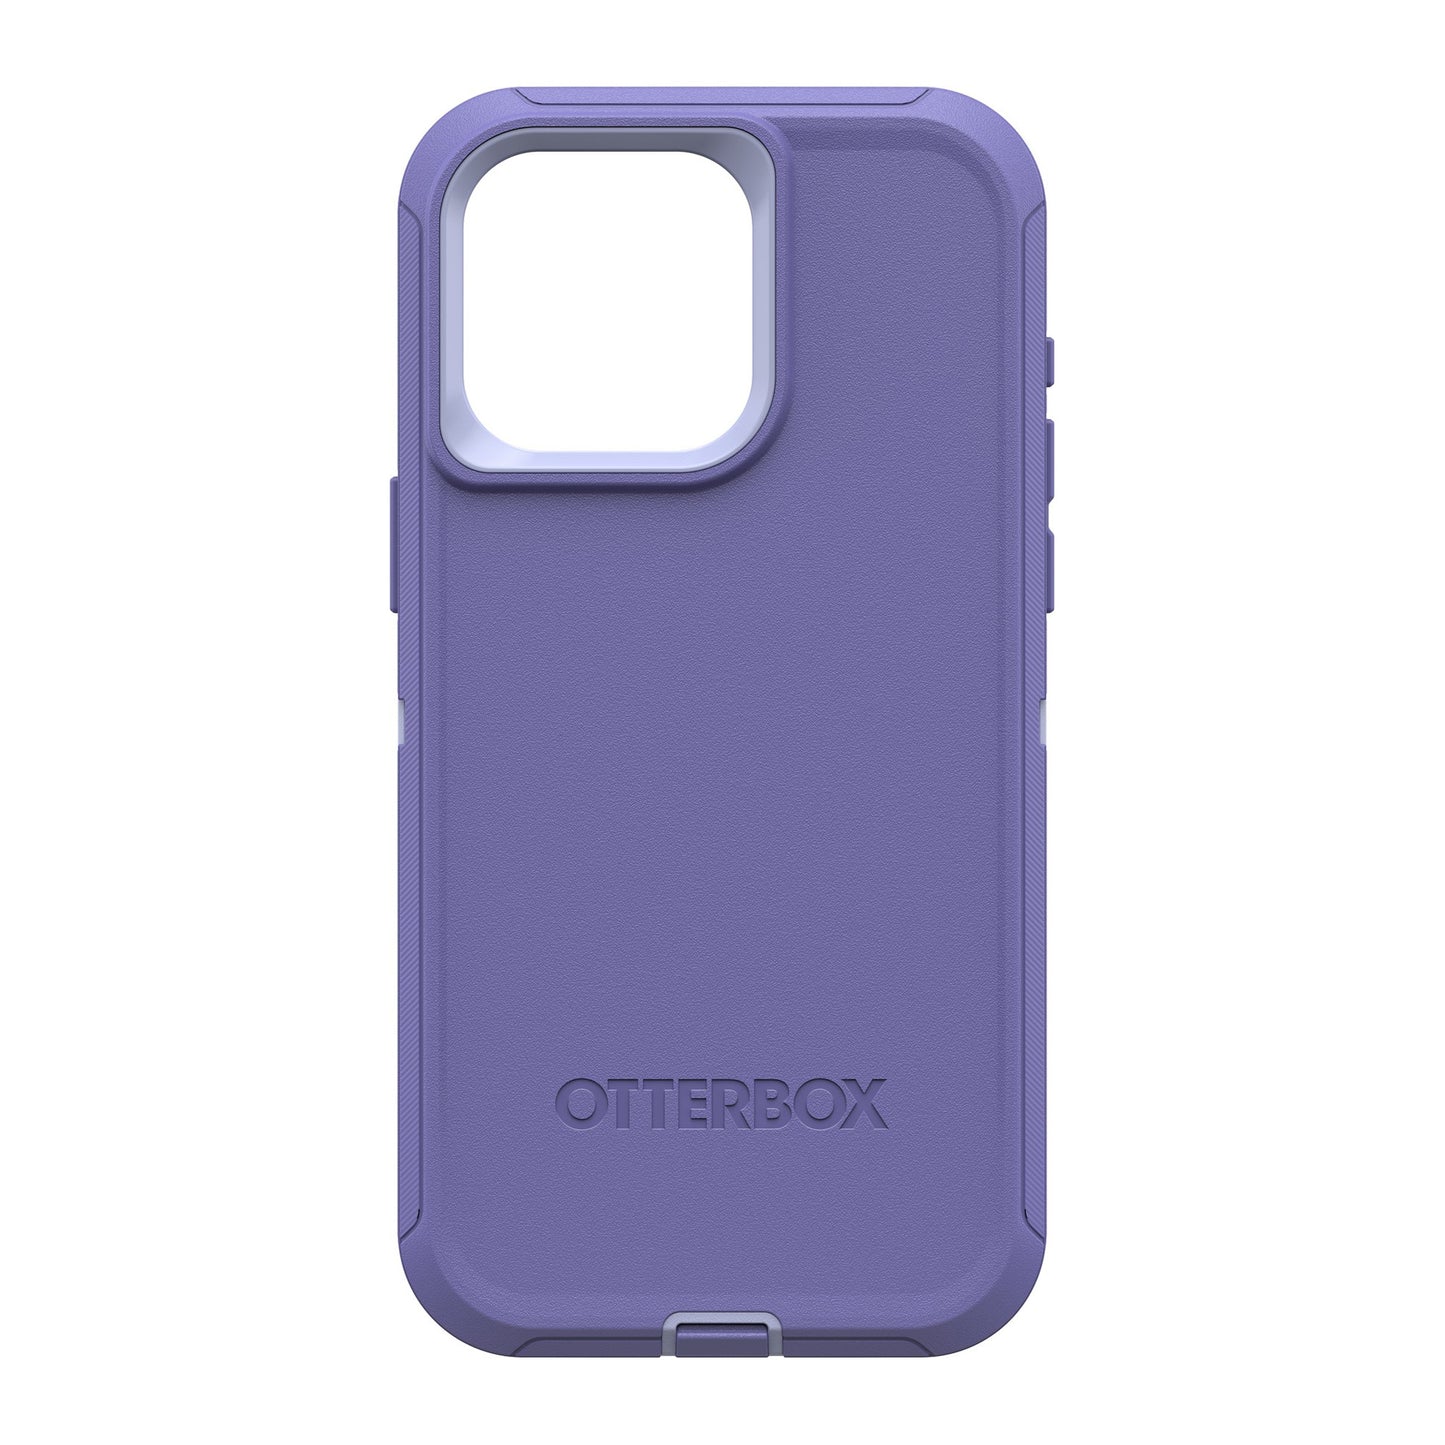 iPhone 15 Pro Max Otterbox Defender Series Case - Purple (Mountain Majesty) - 15-11568